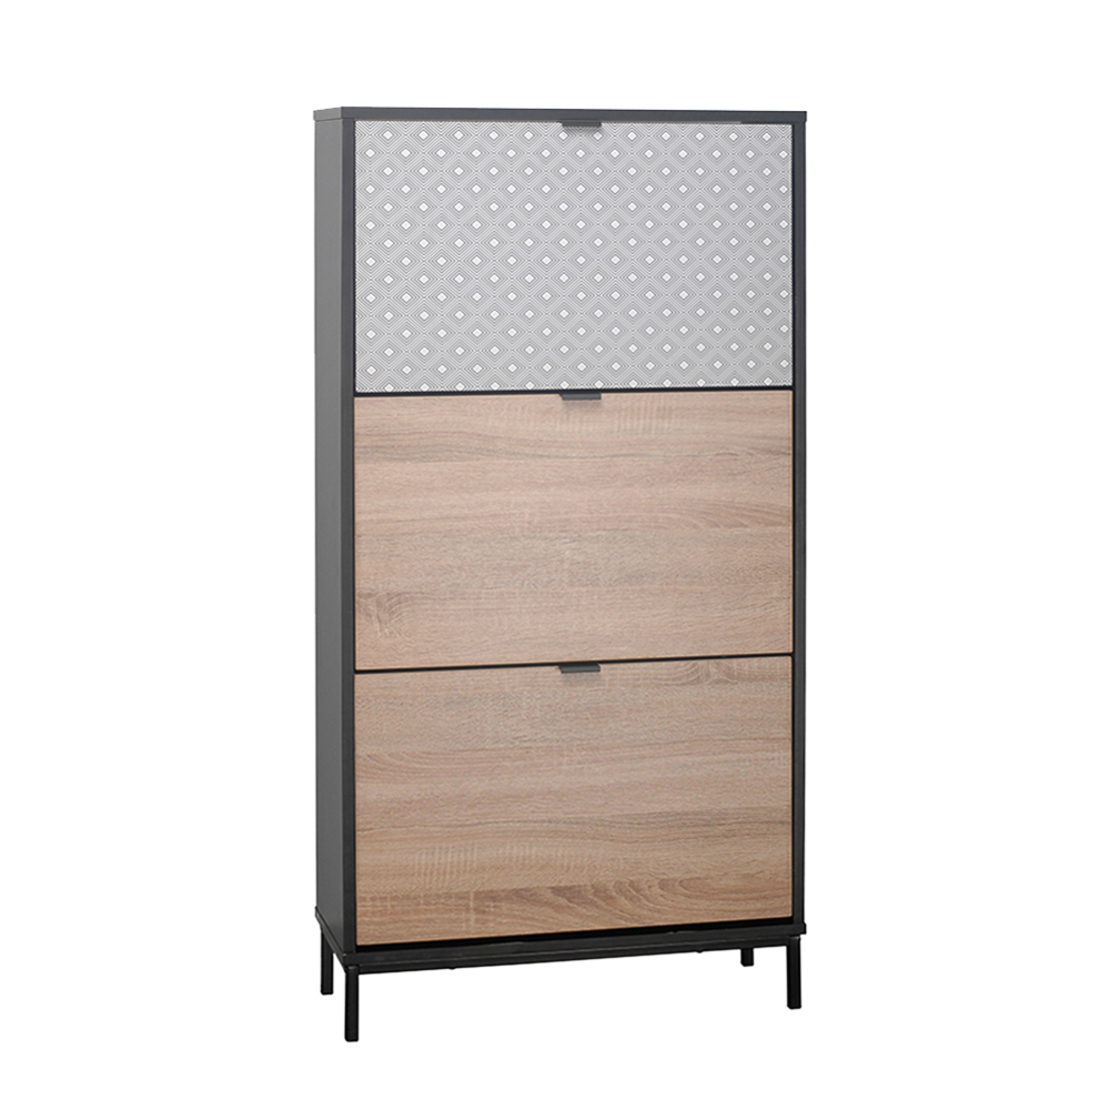 ROMBUS SHOERACK 3DOORS CHIPBOARD WITH MELAMINE CARTA BLACK SONOMA WHITE WITH PATTERN E1 PRC